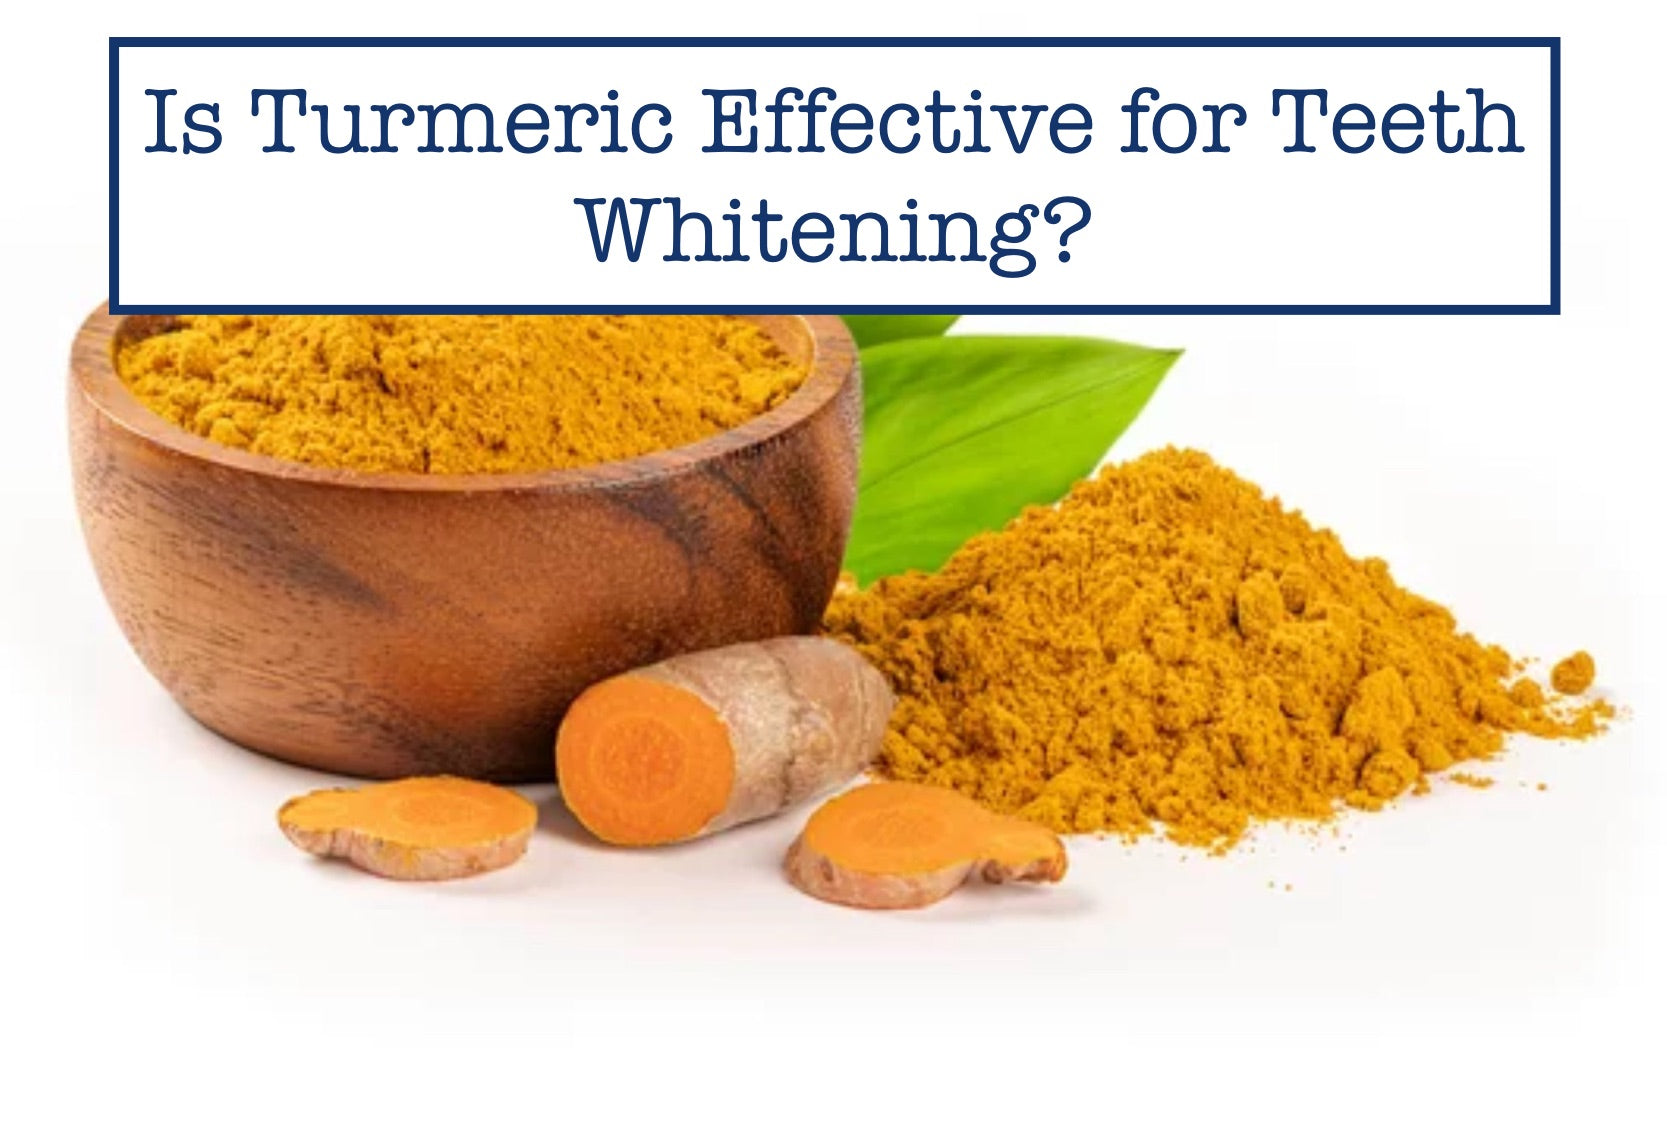 Is Turmeric Effective for Teeth Whitening?